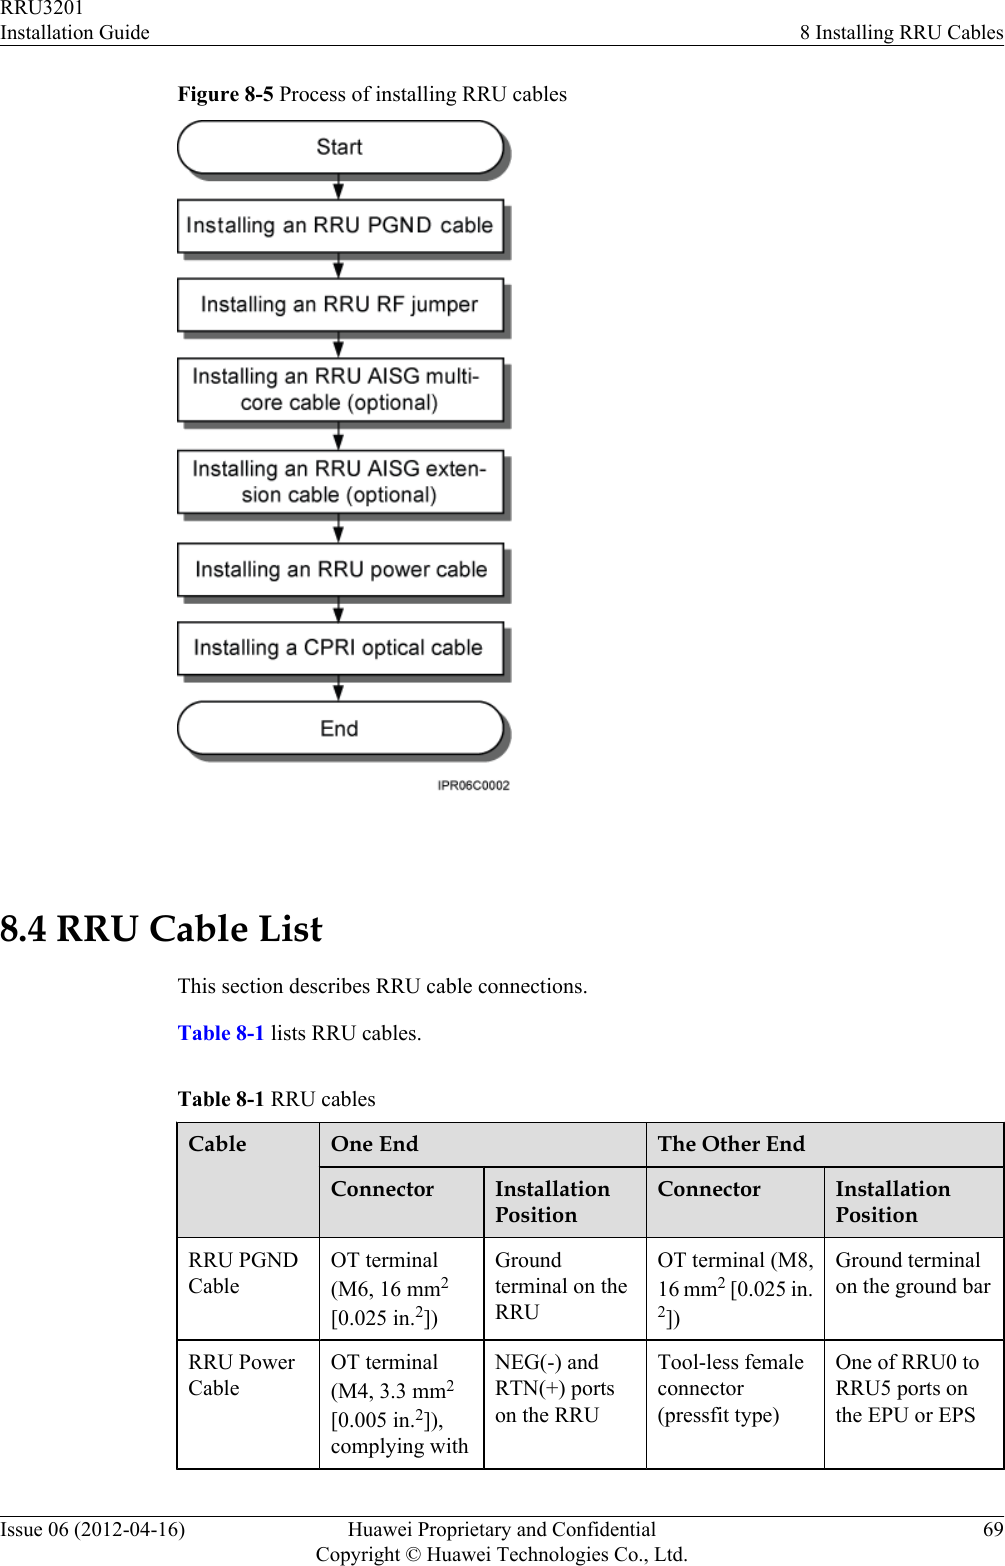 Figure 8-5 Process of installing RRU cables 8.4 RRU Cable ListThis section describes RRU cable connections.Table 8-1 lists RRU cables.Table 8-1 RRU cablesCable One End The Other EndConnector InstallationPositionConnector InstallationPositionRRU PGNDCableOT terminal(M6, 16 mm2[0.025 in.2])Groundterminal on theRRUOT terminal (M8,16 mm2 [0.025 in.2])Ground terminalon the ground barRRU PowerCableOT terminal(M4, 3.3 mm2[0.005 in.2]),complying withNEG(-) andRTN(+) portson the RRUTool-less femaleconnector(pressfit type)One of RRU0 toRRU5 ports onthe EPU or EPSRRU3201Installation Guide 8 Installing RRU CablesIssue 06 (2012-04-16) Huawei Proprietary and ConfidentialCopyright © Huawei Technologies Co., Ltd.69